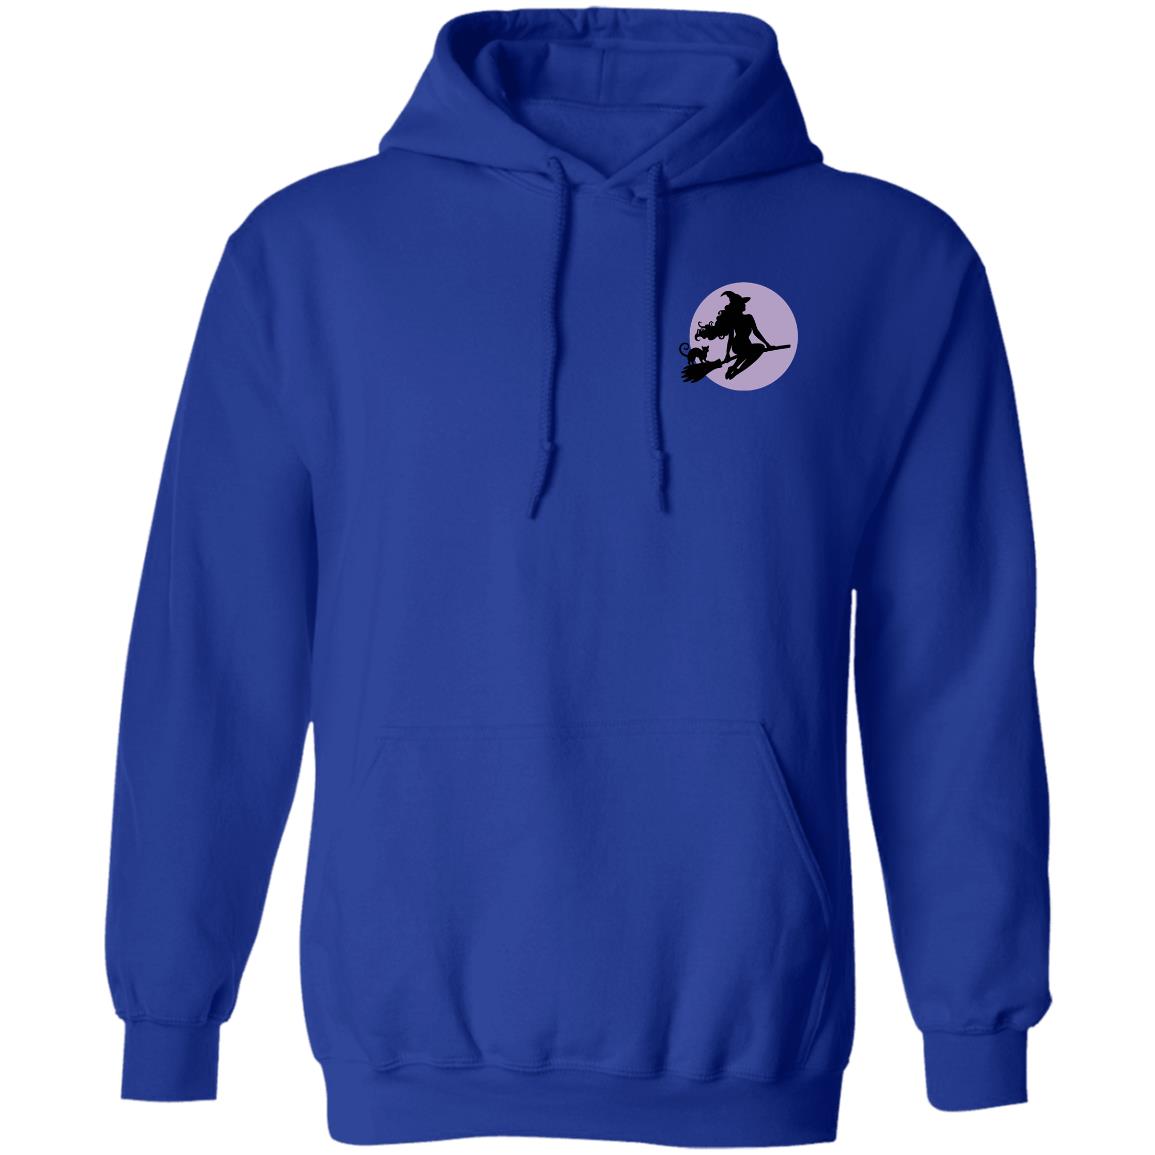 Witch Moon Front Logo Witchy Pool Brewing Since 1692 Hoodie Sweatshirt